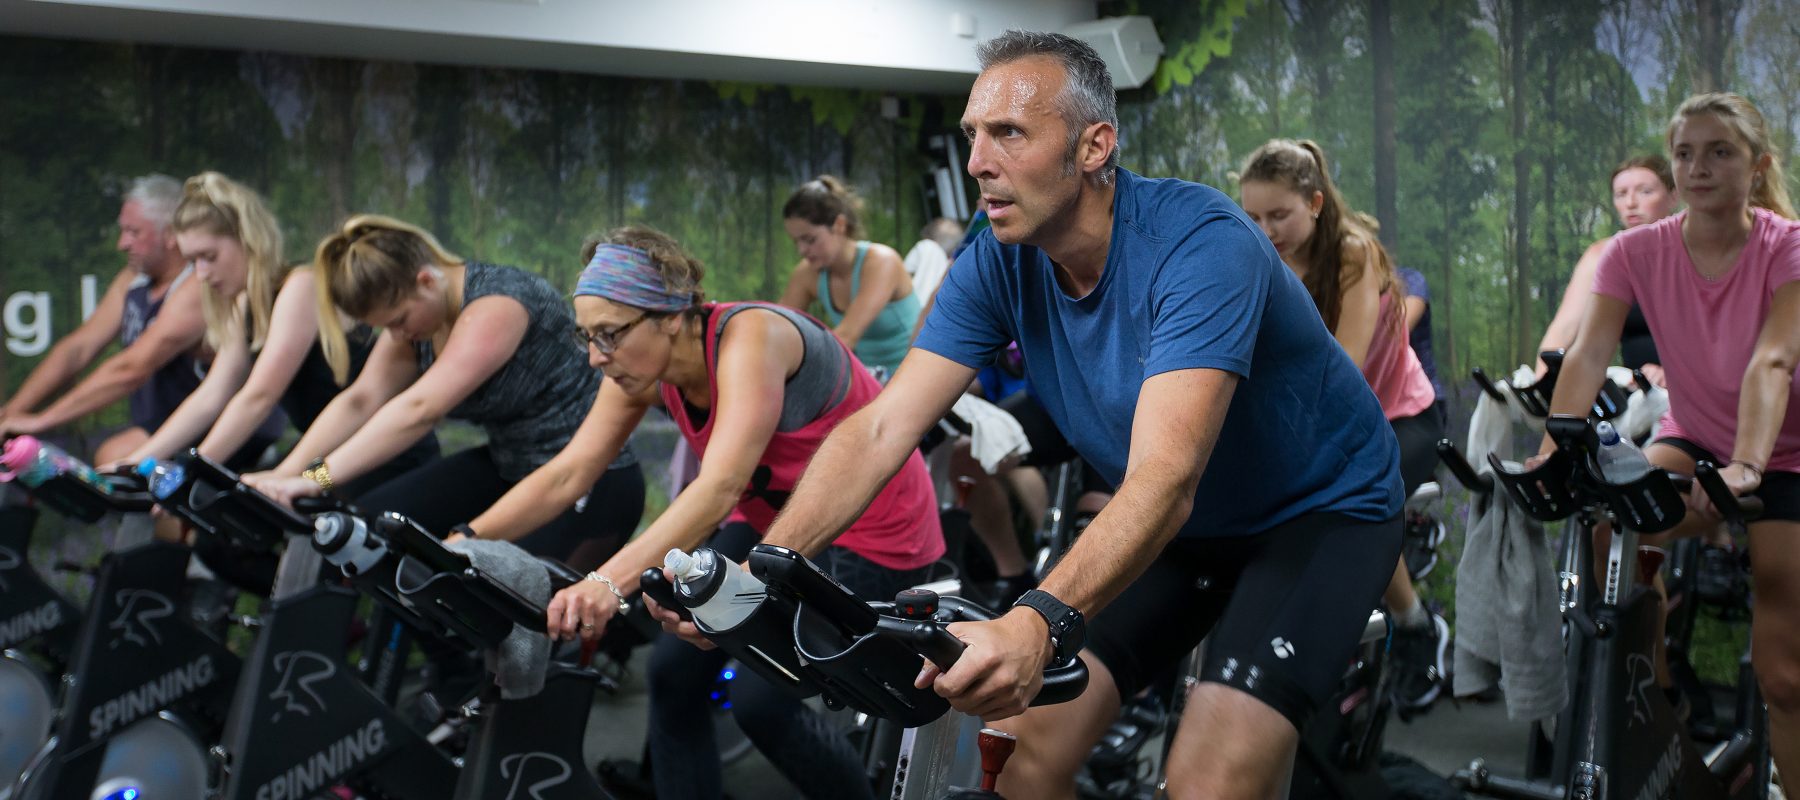 We’re saying goodbye to Spinning, and hello to indoor cycling!